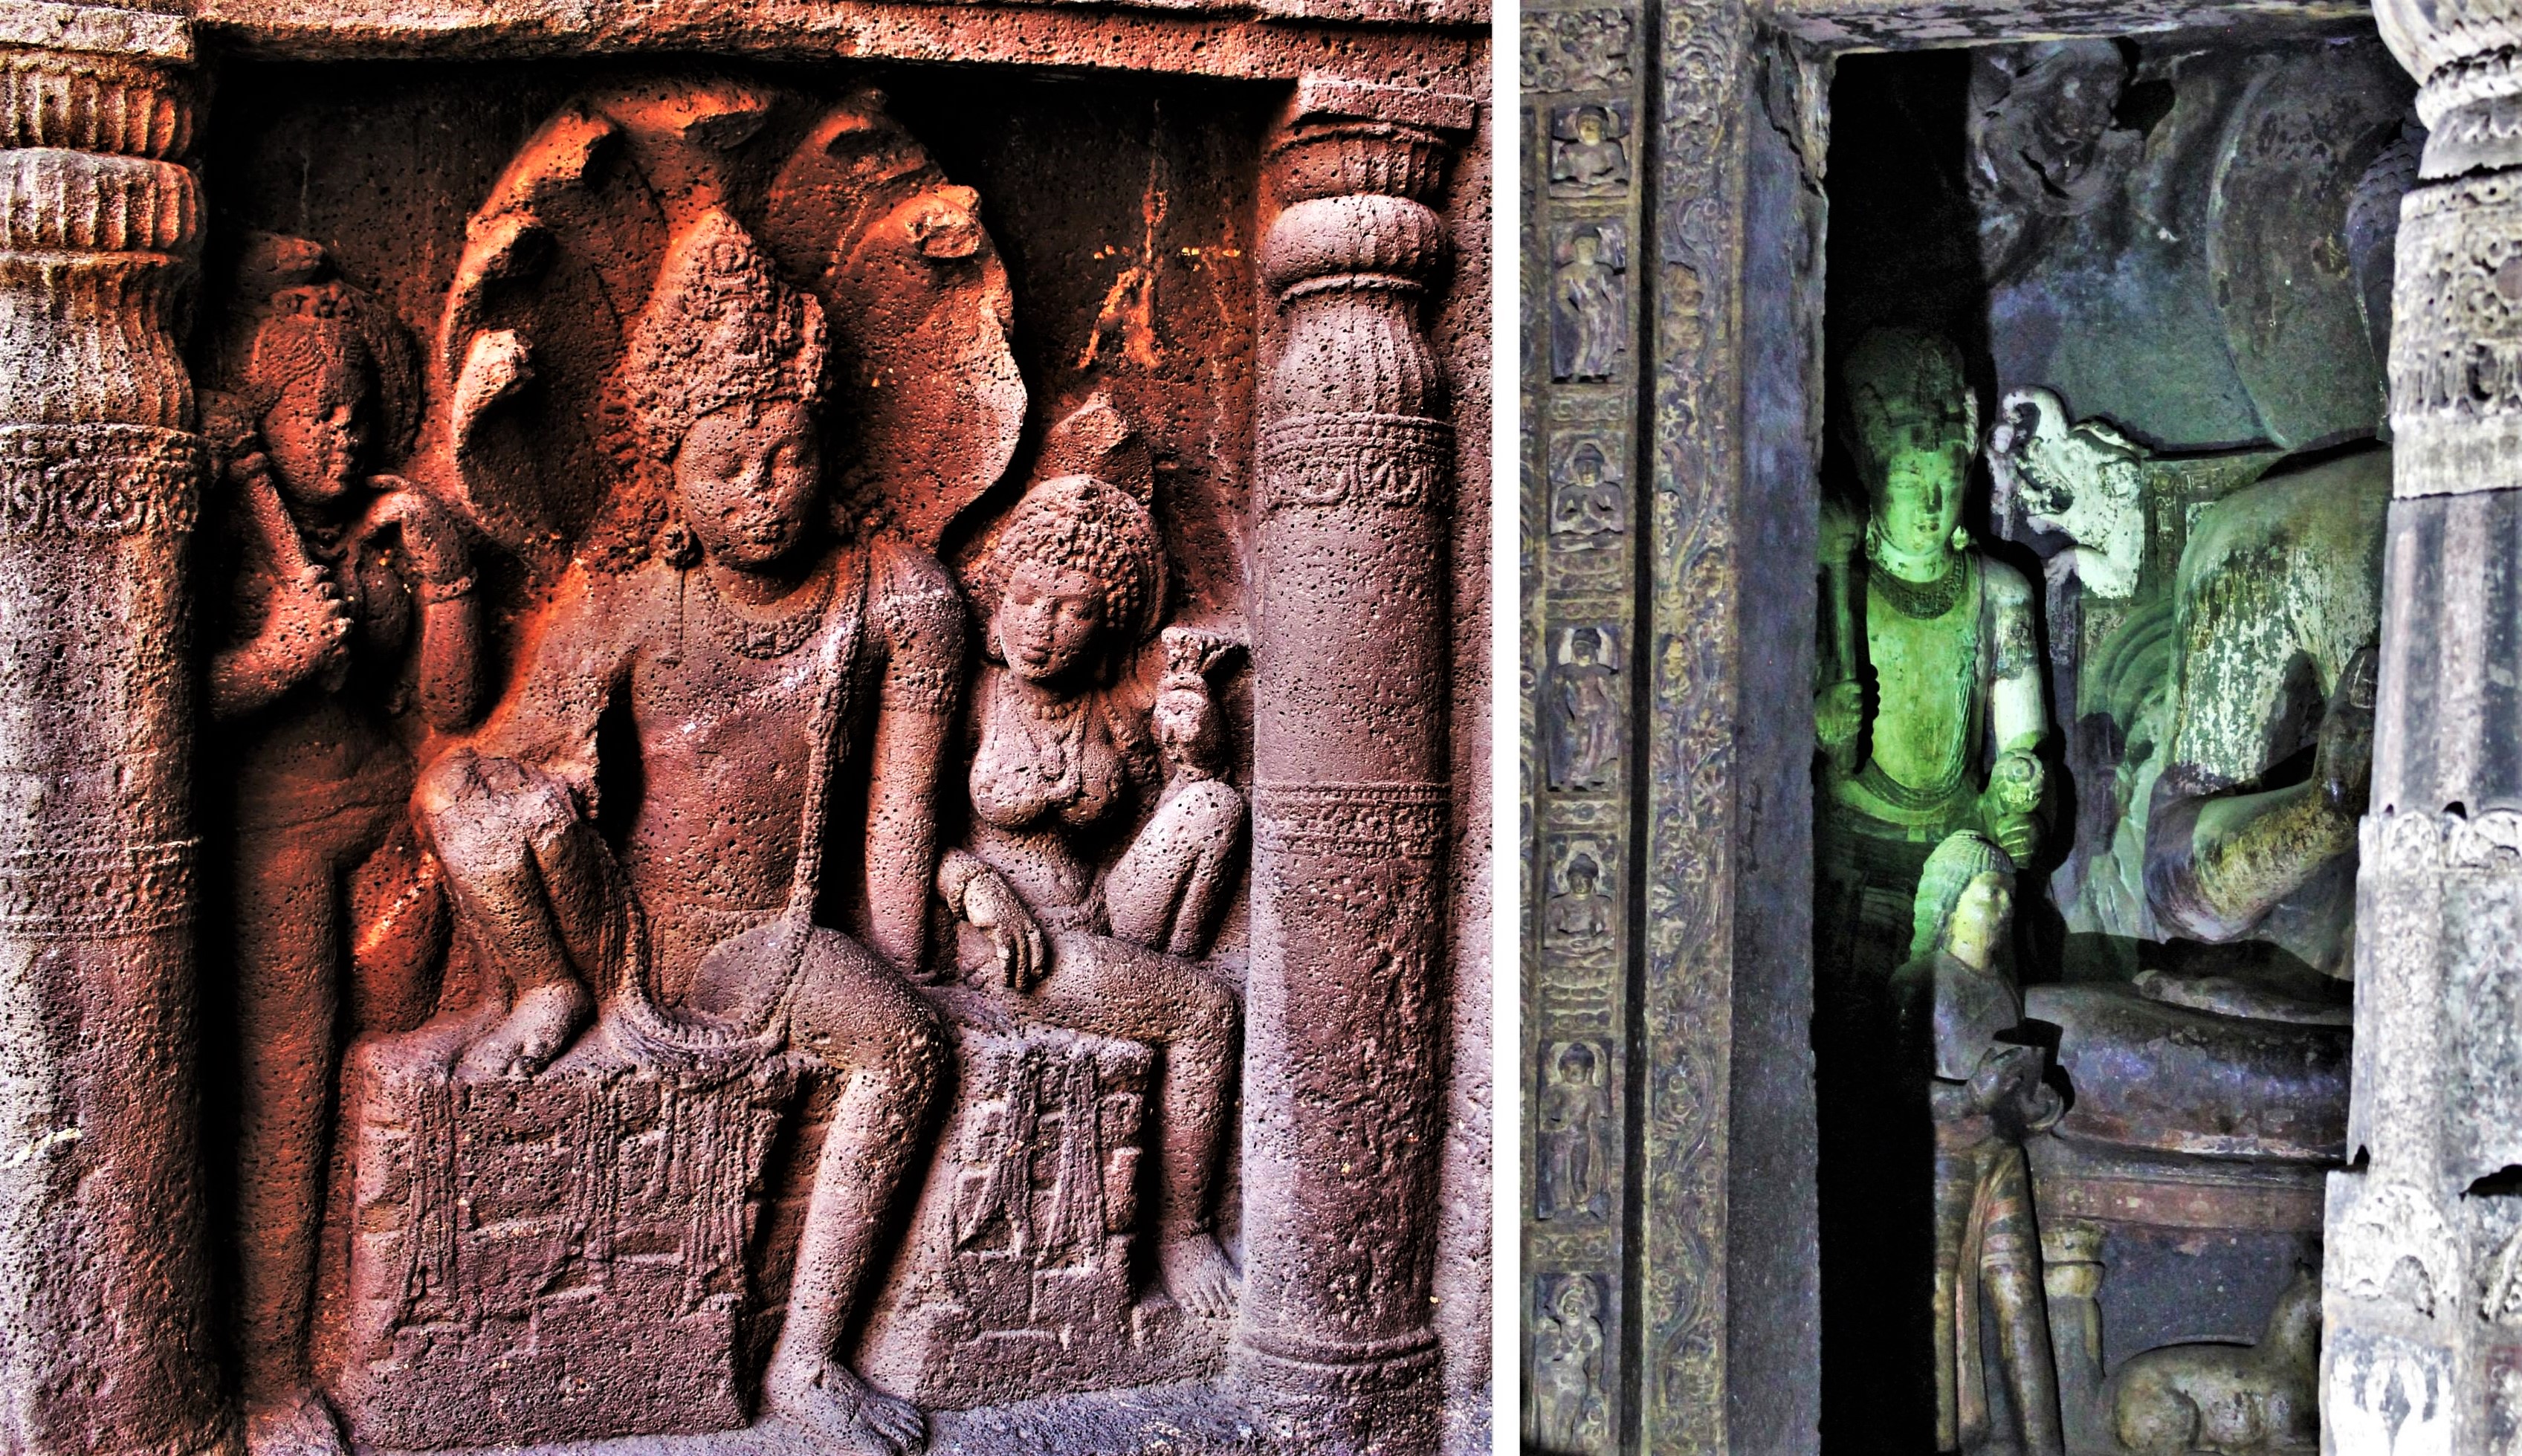 Left: Sculpture of Nagaraja and his wife; Right: Sculpture of Buddha offering begging bowl to his son Rahula (Cave 19)